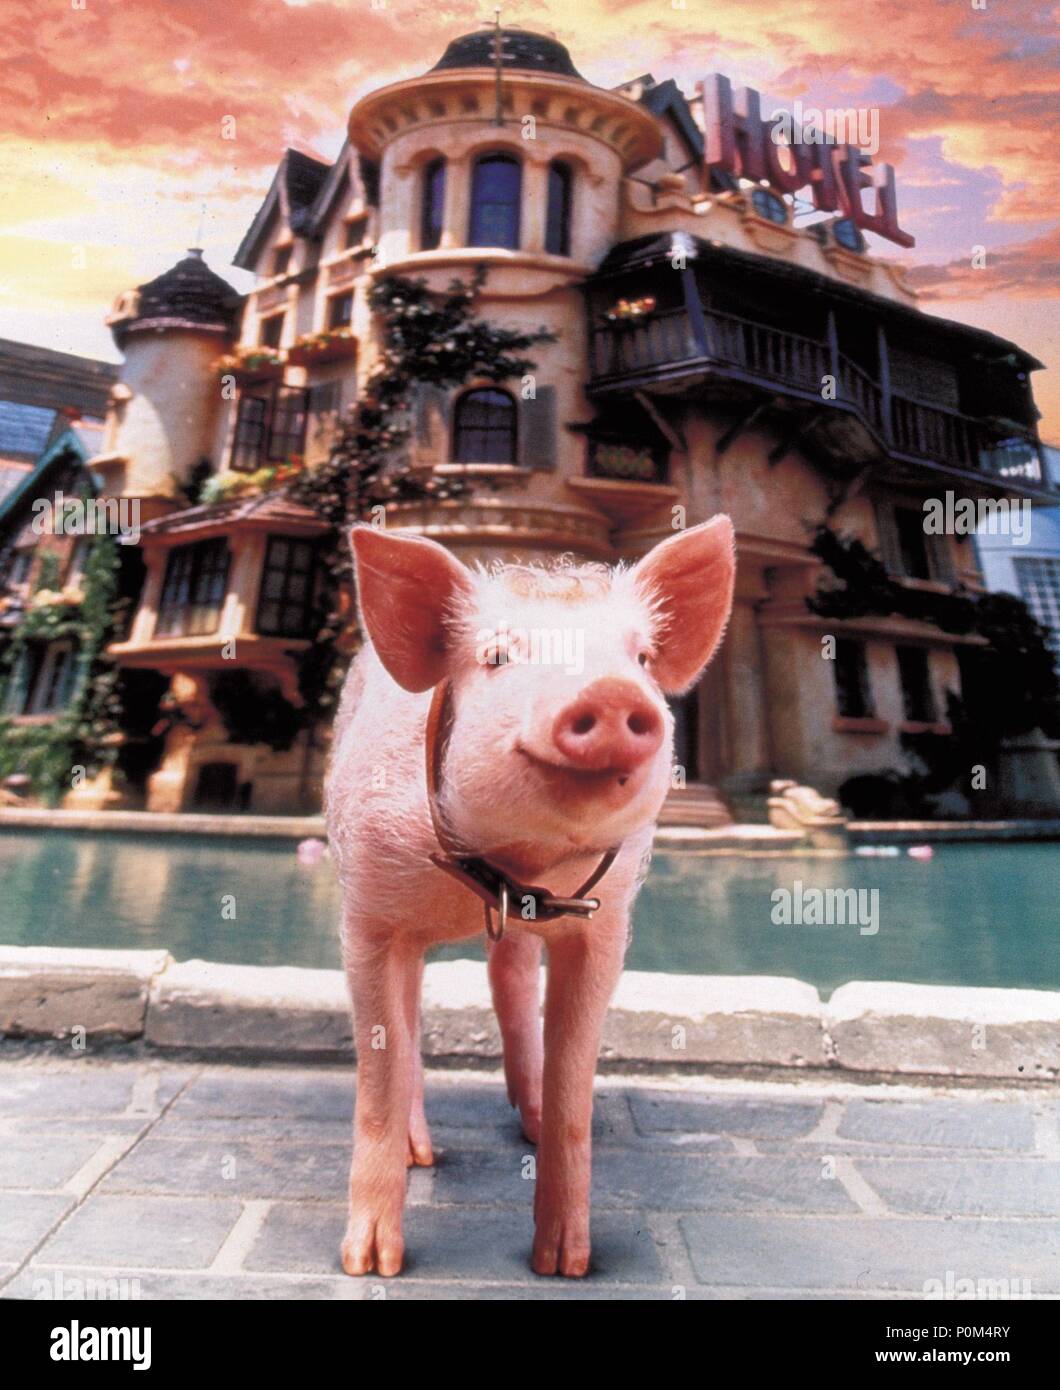 Original Film Title: BABE: PIG IN THE CITY.  English Title: BABE: PIG IN THE CITY.  Film Director: GEORGE MILLER.  Year: 1998. Credit: UNIVERSAL PICTURES / Album Stock Photo